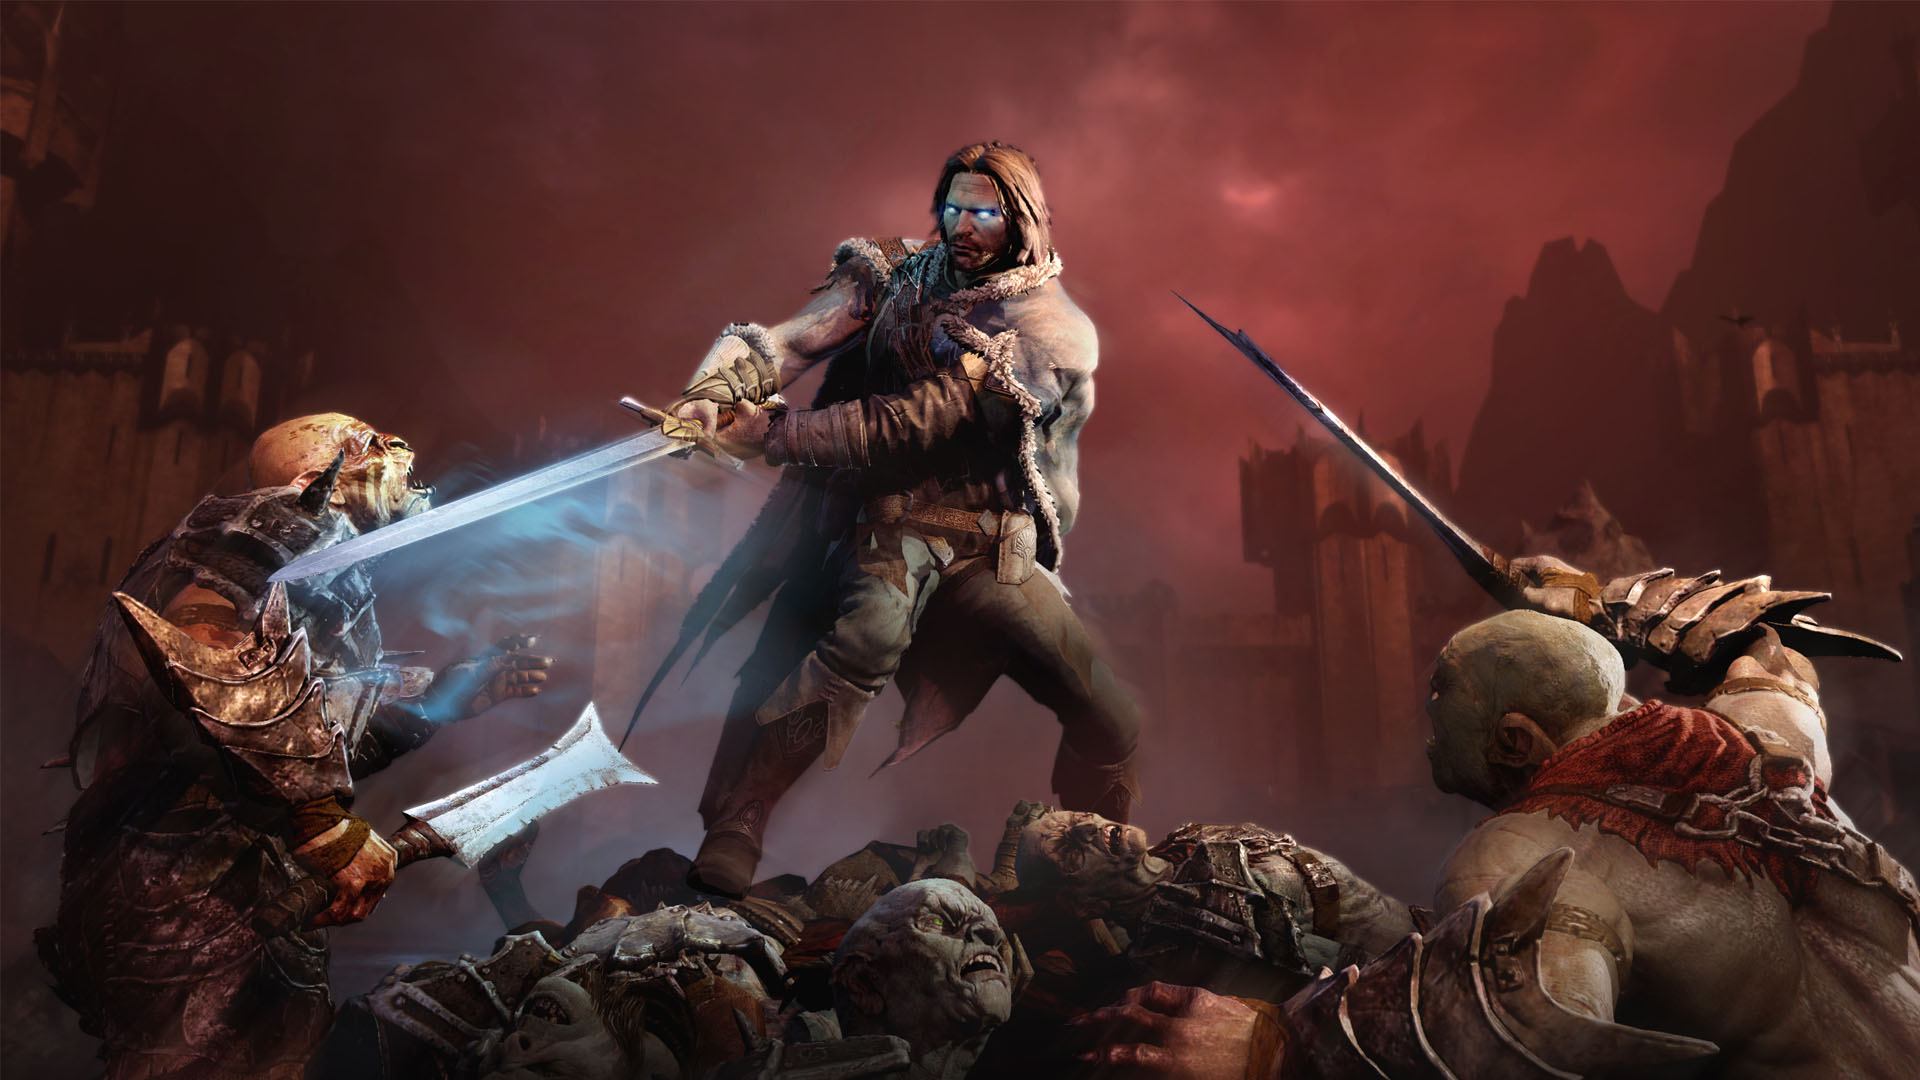 Middle-Earth: Shadow of Mordor - Complete DLC Bundle Steam CD Key 5.64 $